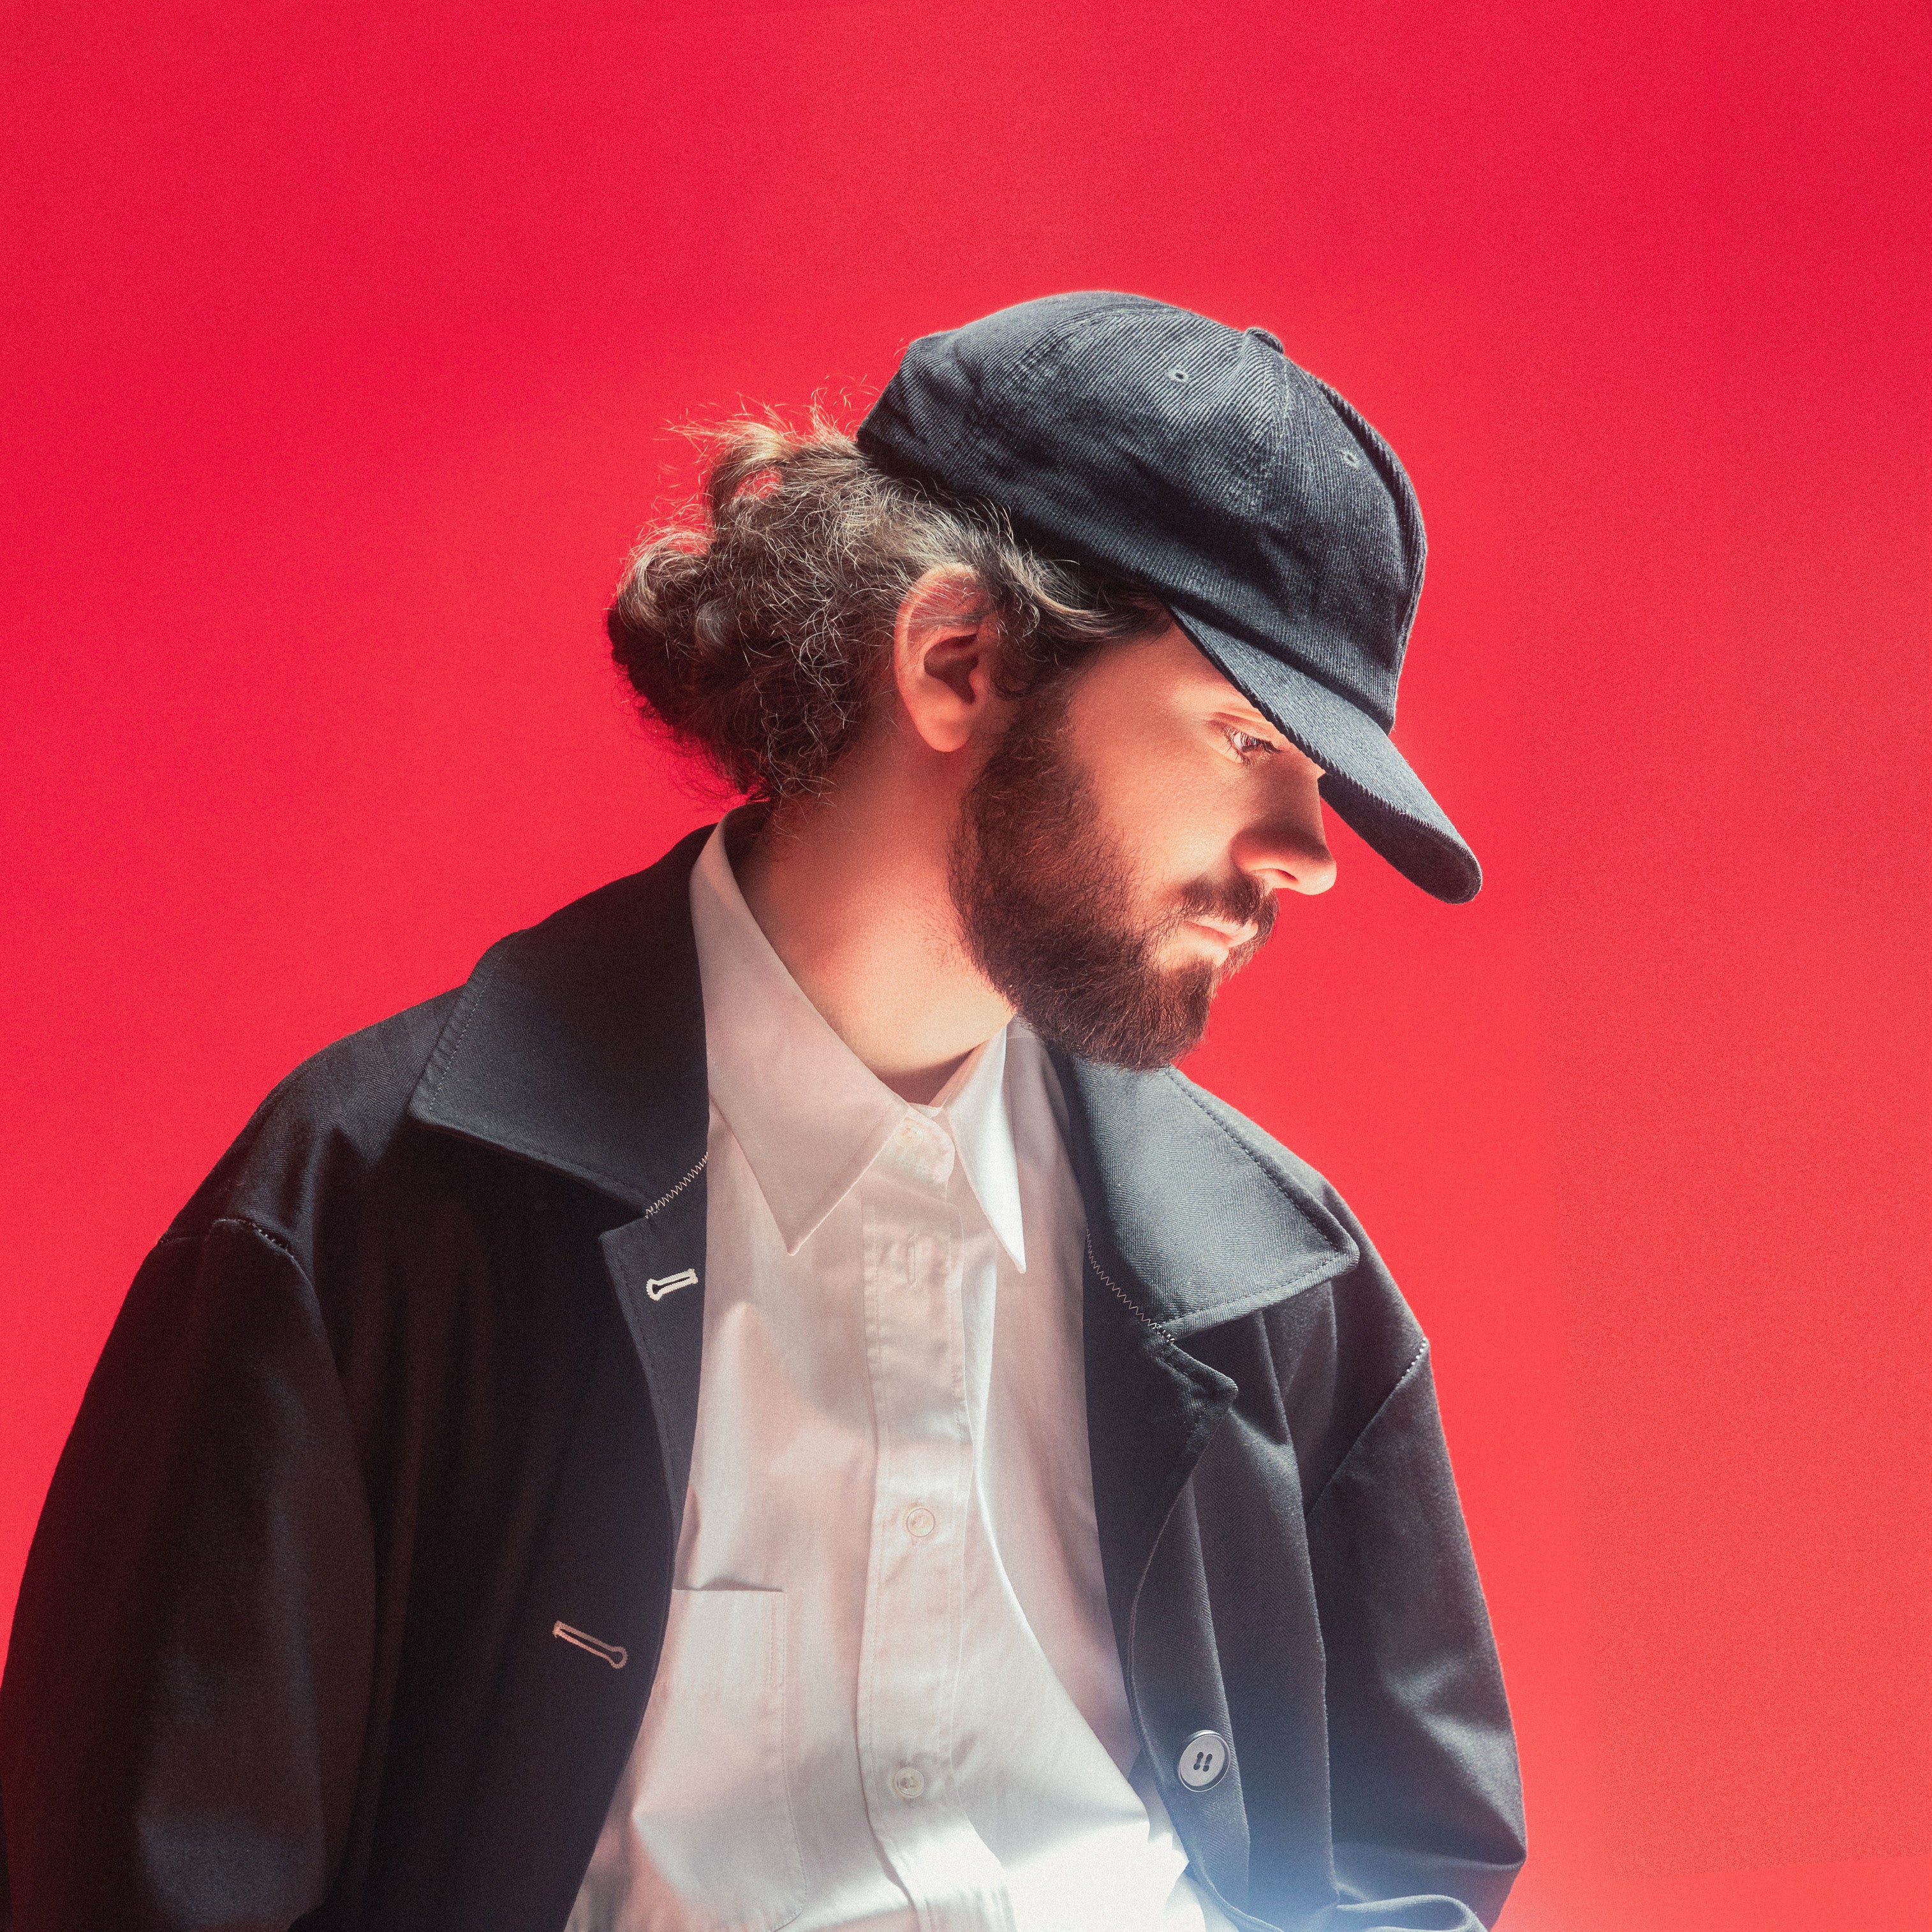 new presale code for Madeon (DJ Set) affordable tickets in Washington